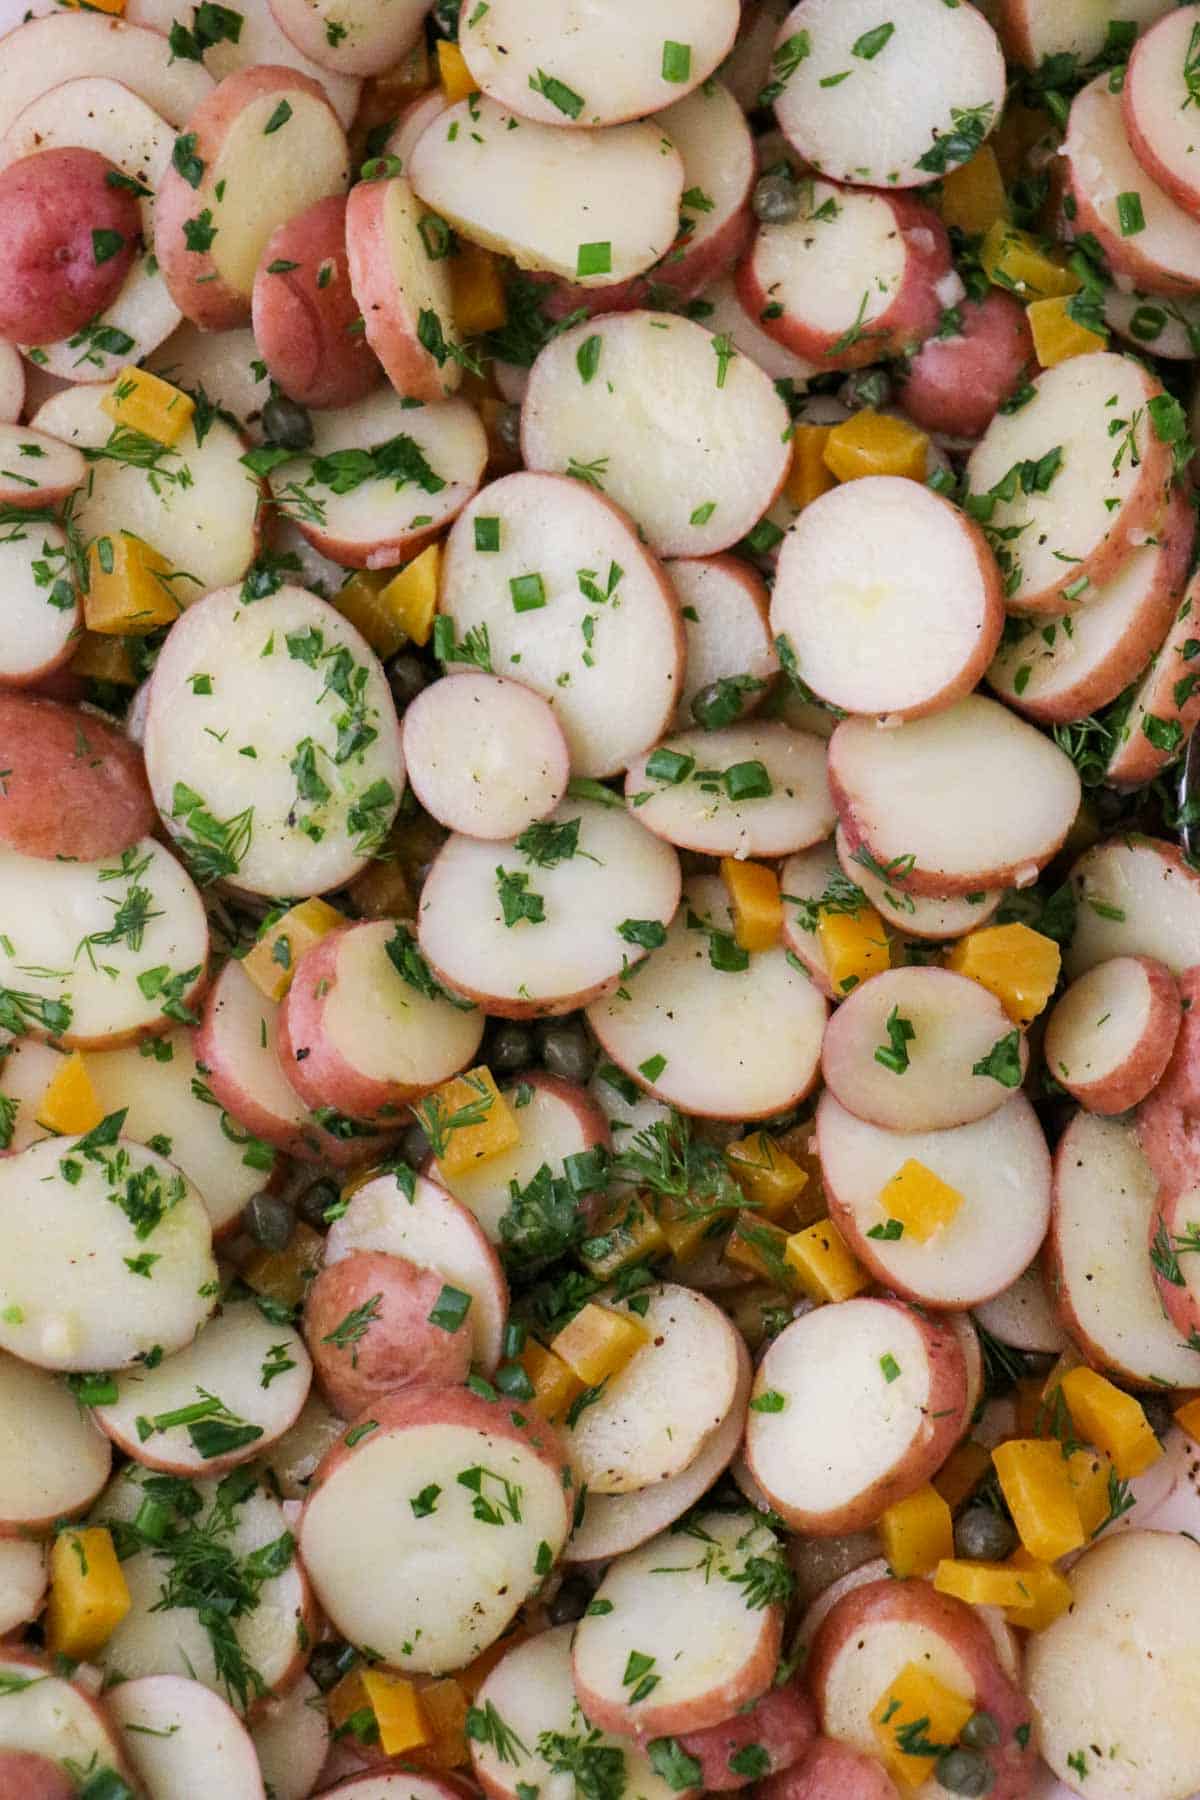 Herbed Potato Salad with capers and diced golden beets.